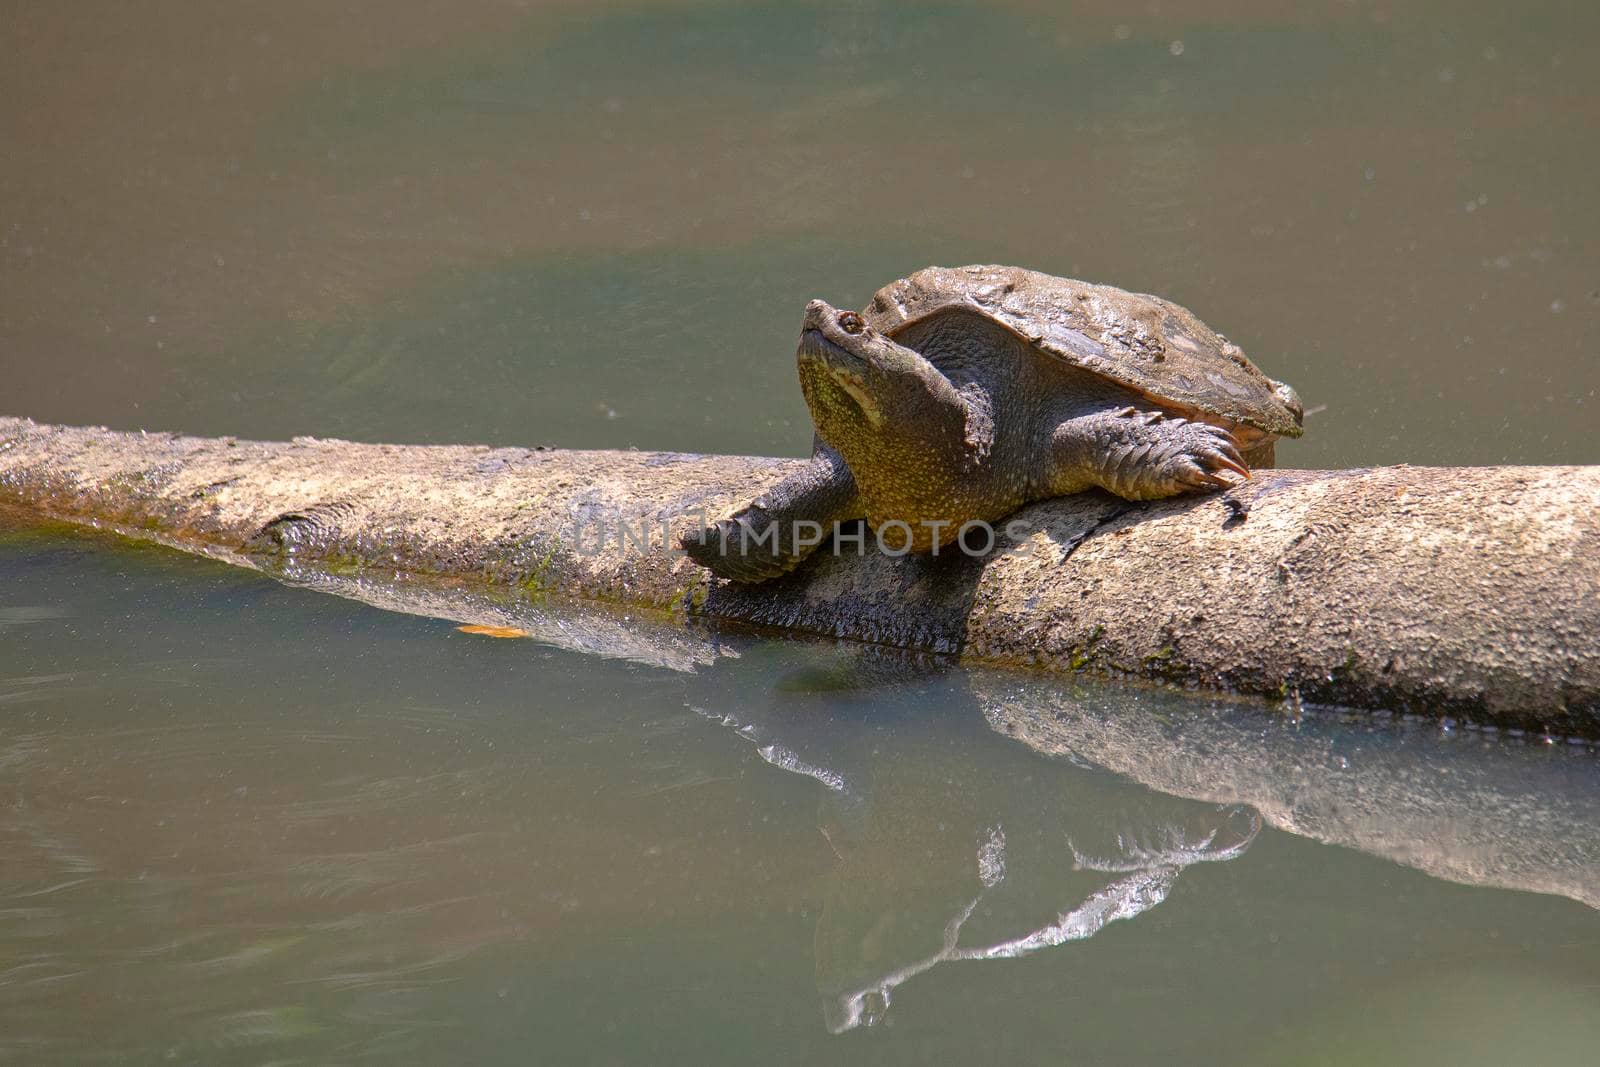 Snapping turtle sunning on a partially submerged log;